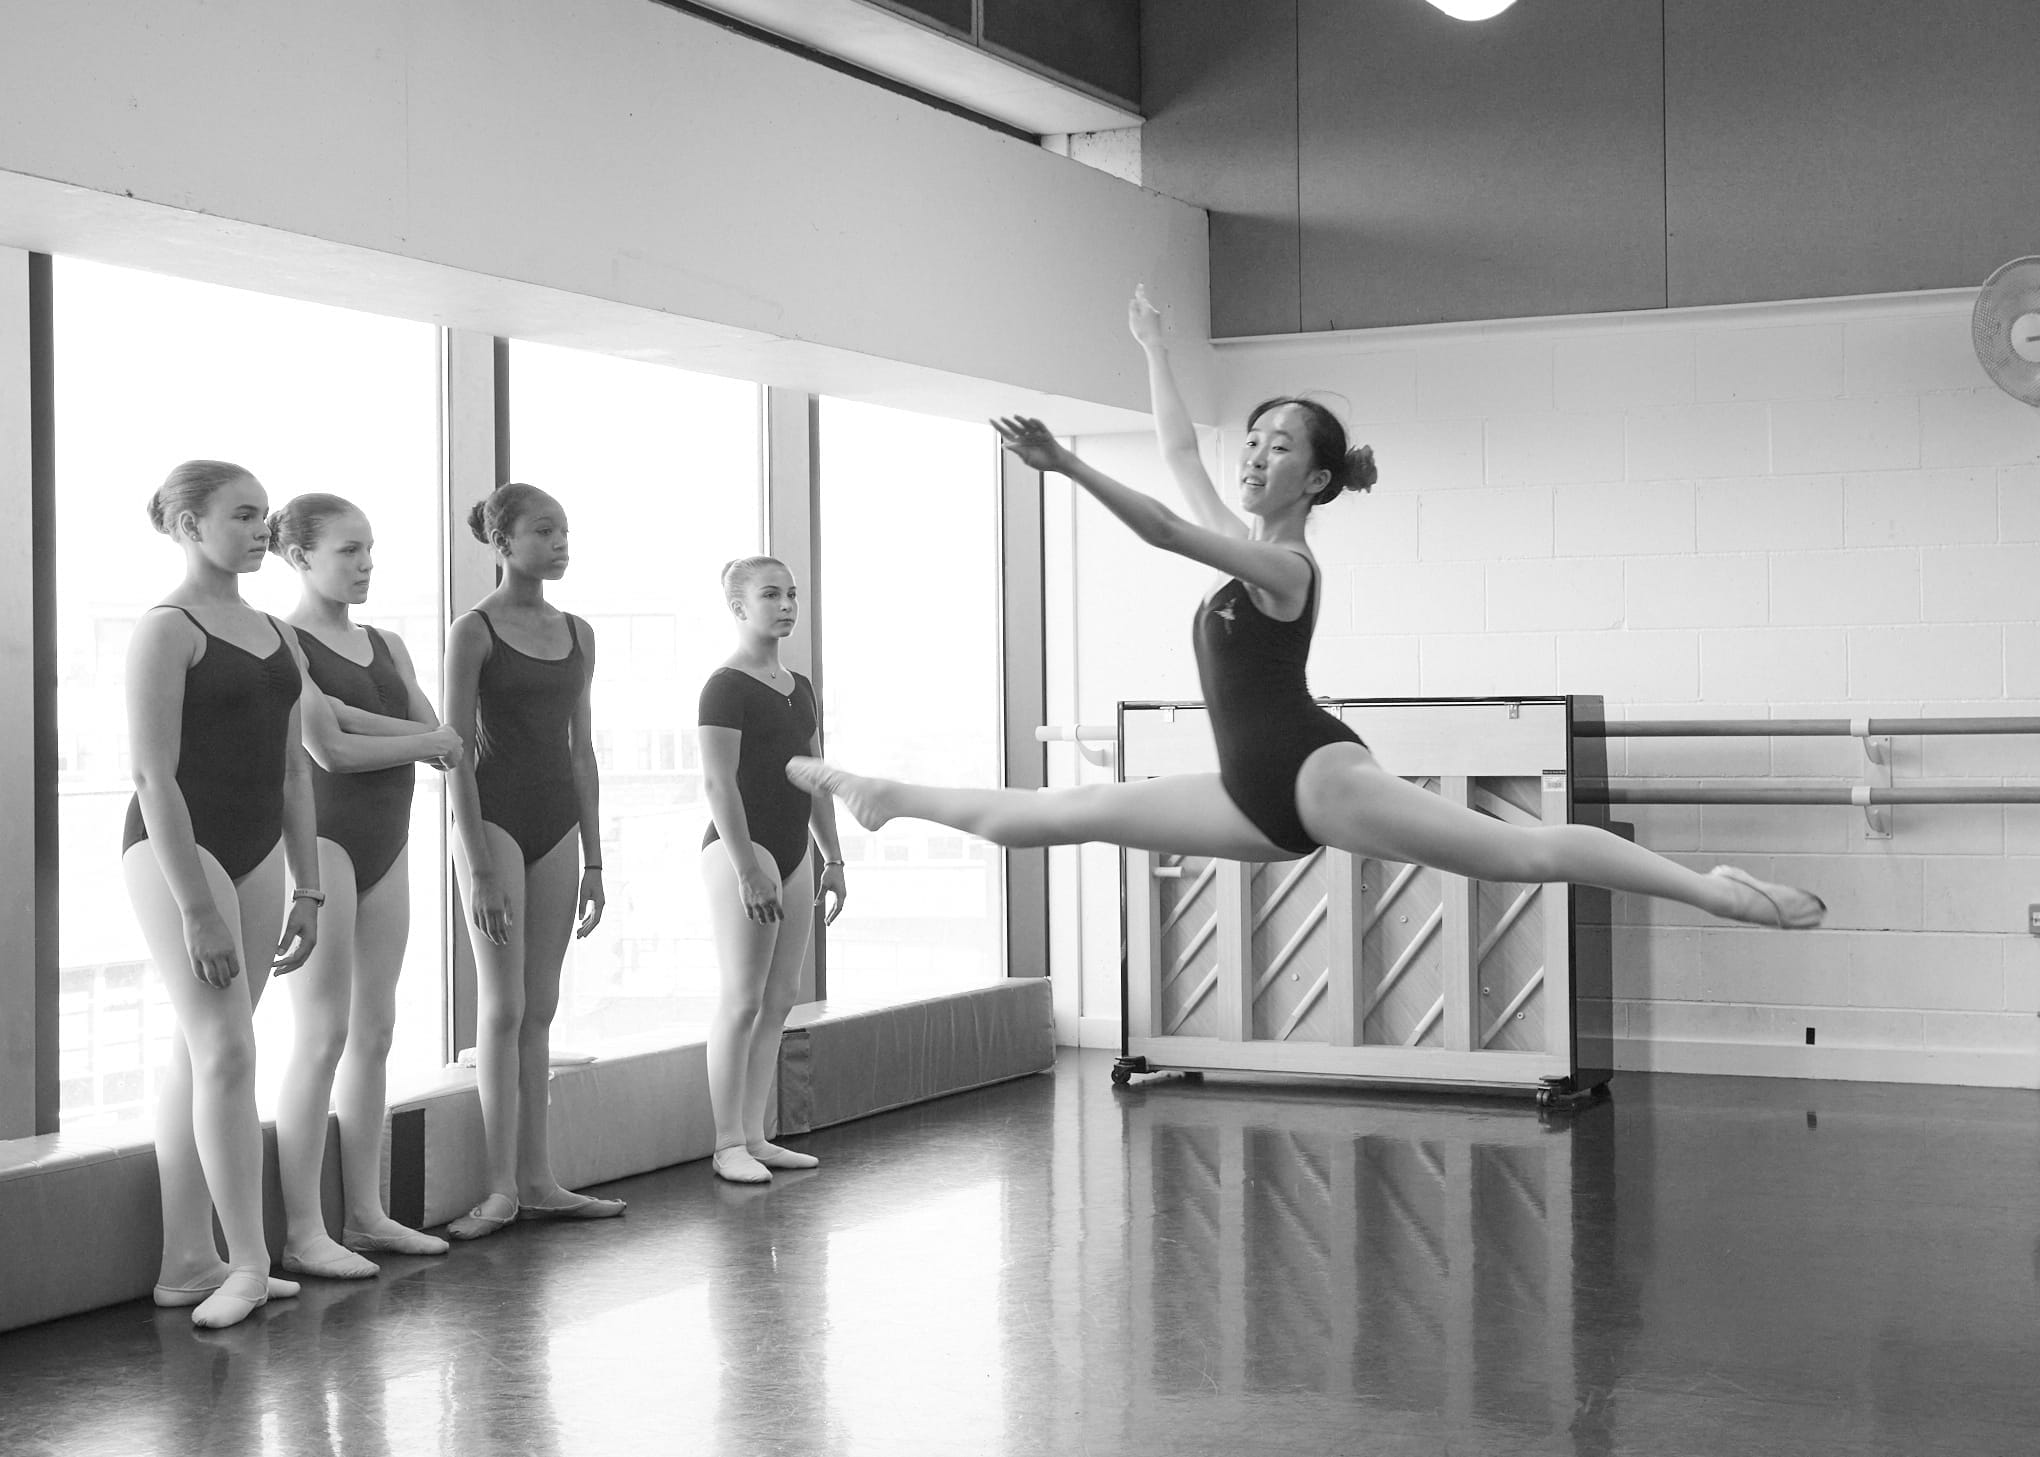 A black and white photo of a ballet studio, where a diverse group of dancers in black leotards are gathered. Centre stage, a featured dancer is leaping in an impressive arabesque.